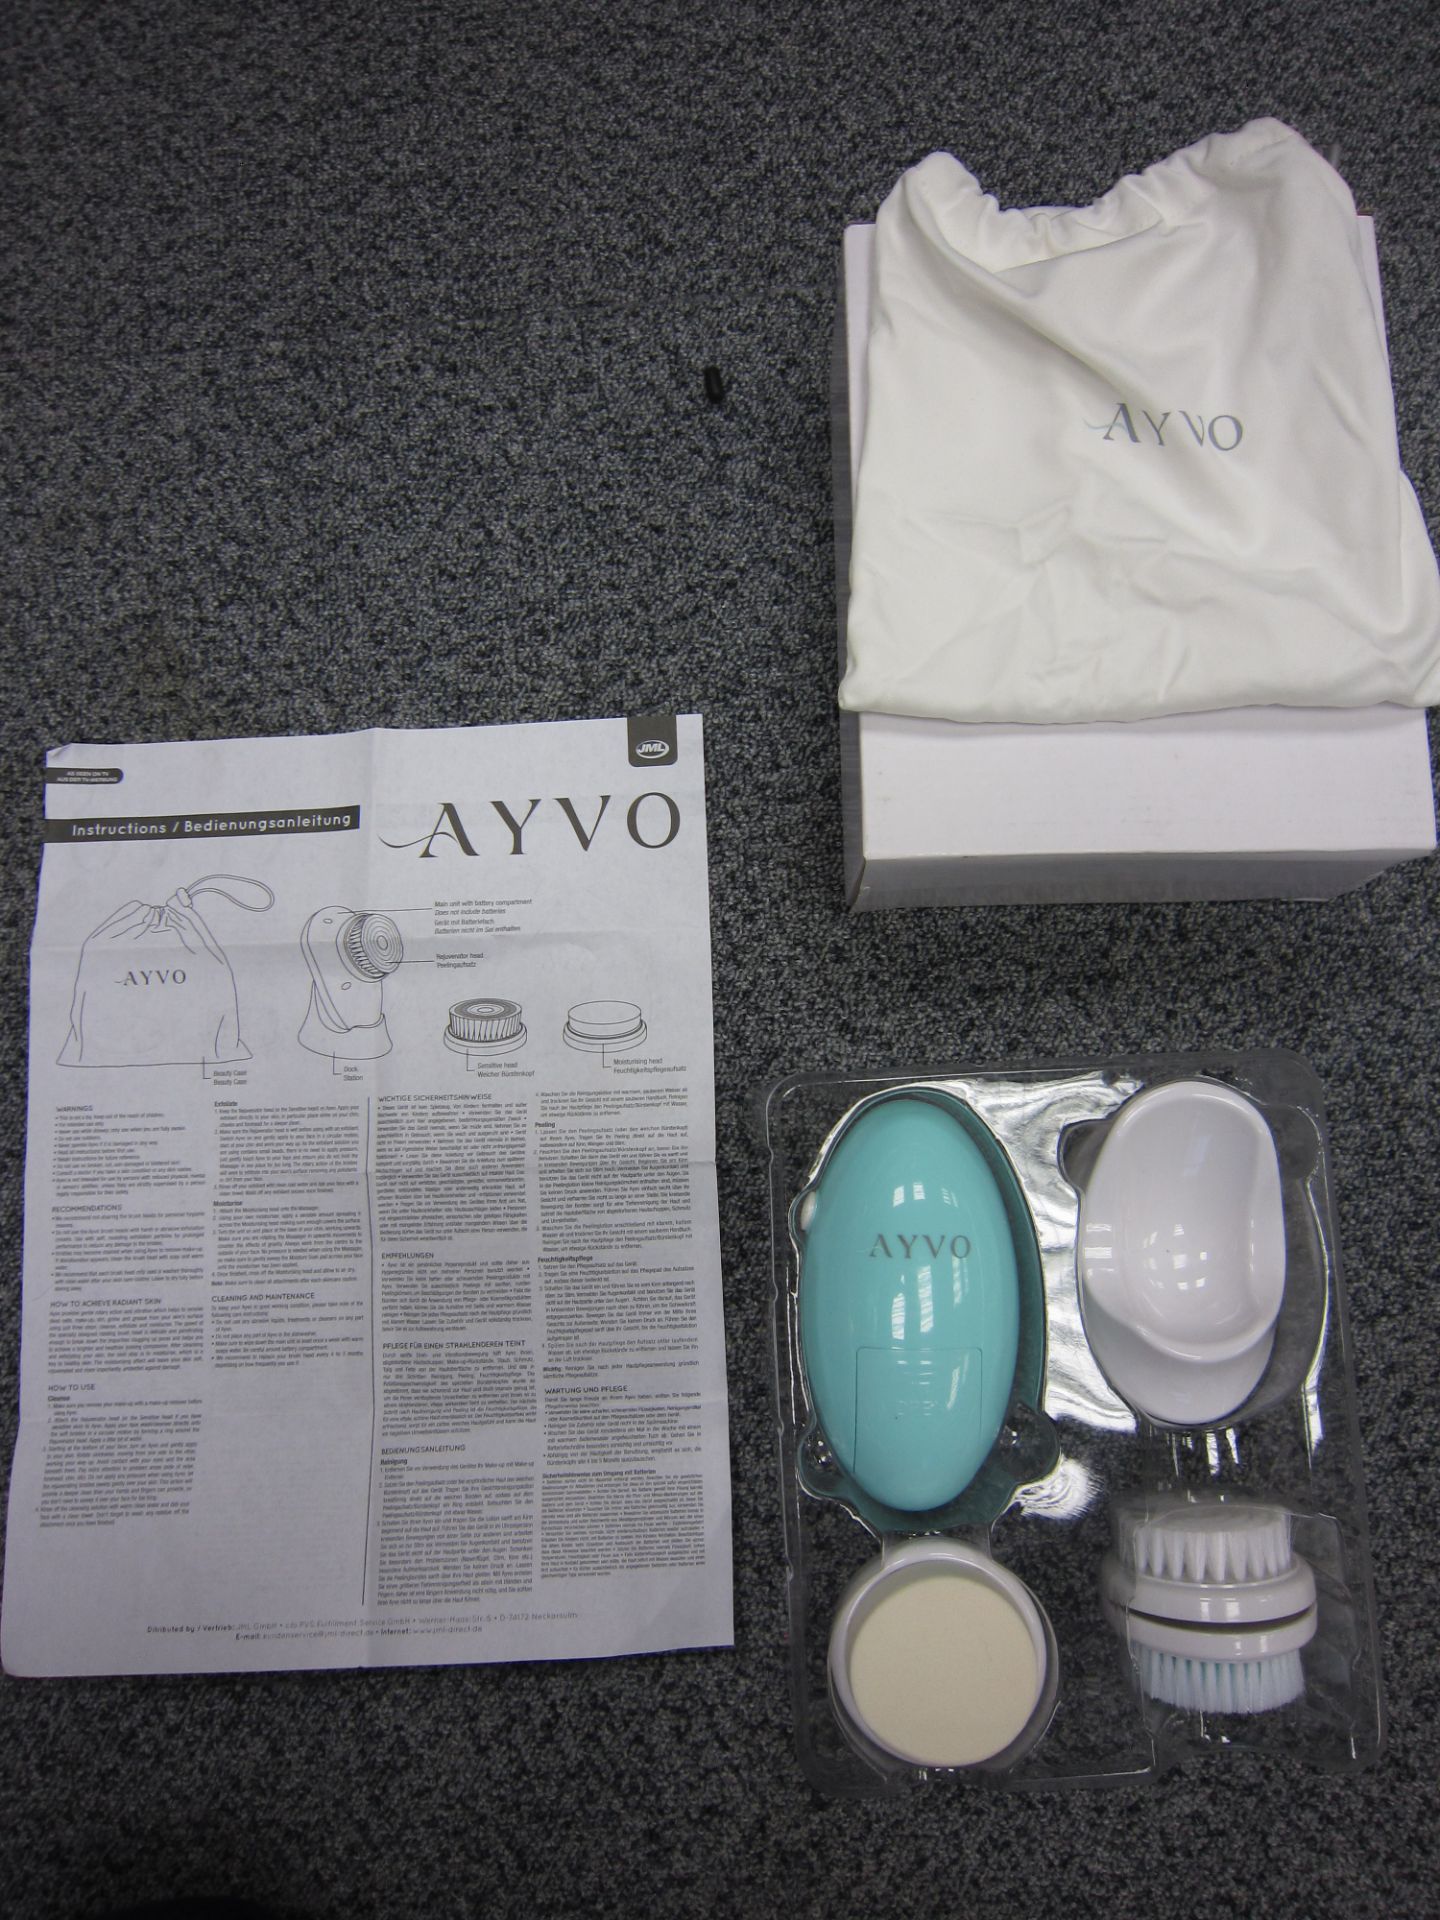 100Pcs Brand New Sealed JML Avyo Facial Massager and Cleanser Tool - RRP £14.99 - 100Pcs In Lot